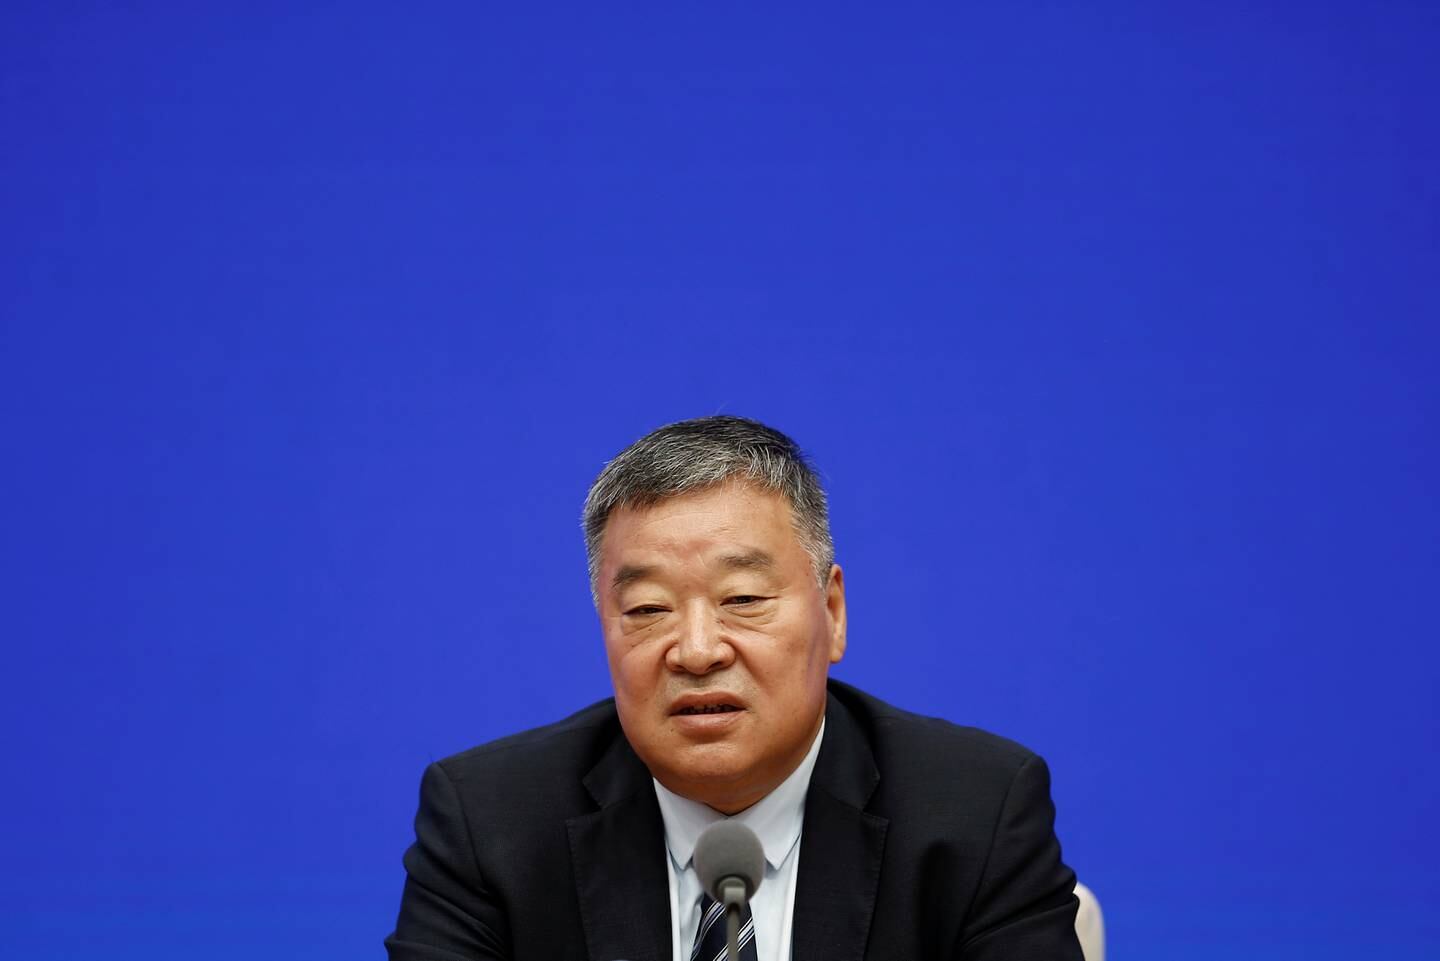 Liang Wannian, the Chinese team leader on the World Health Organisation joint expert team. Reuters